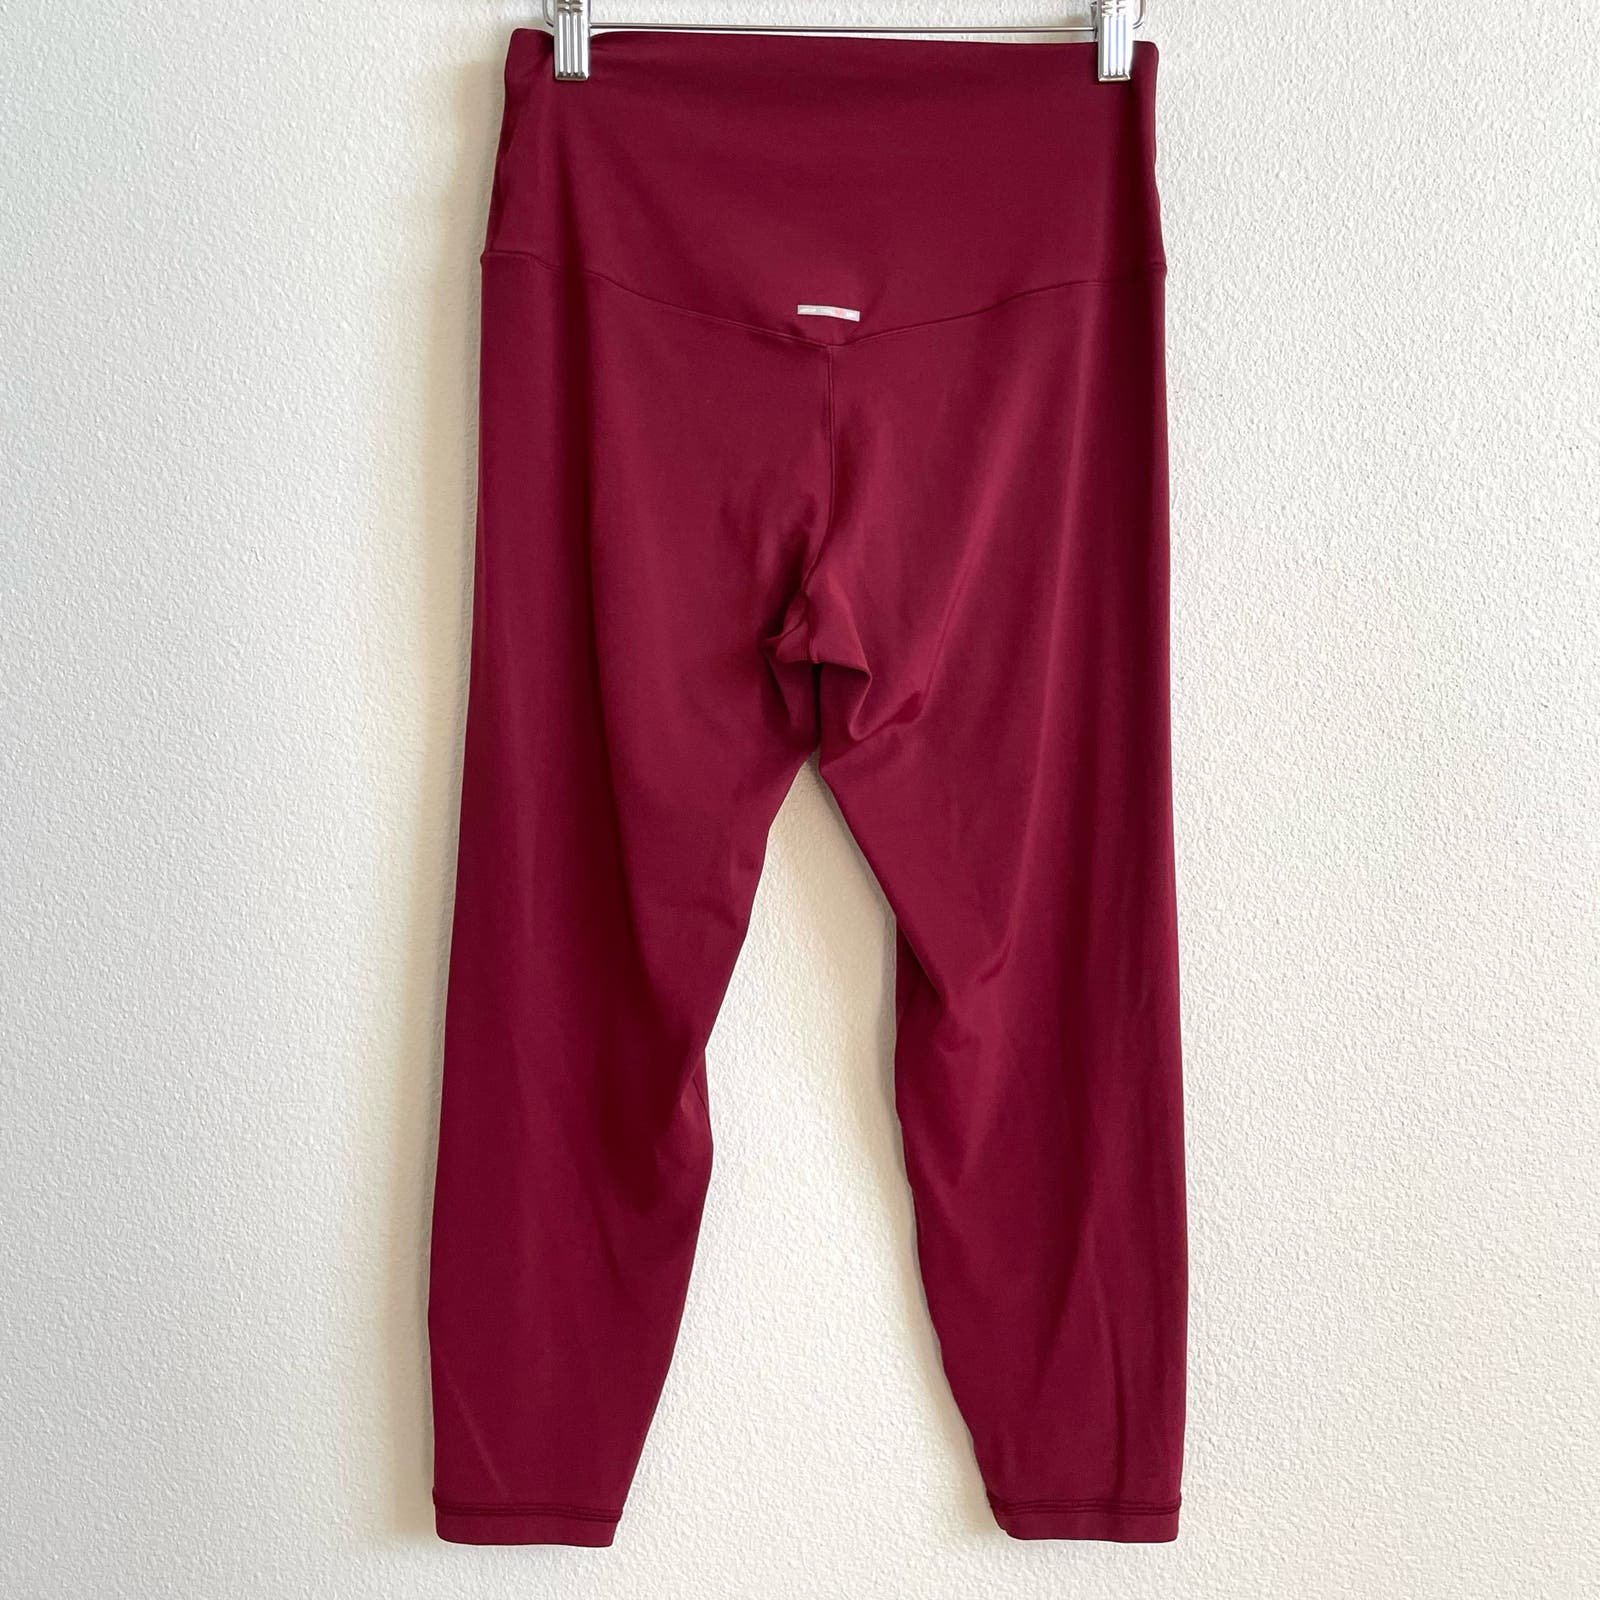 large selection Aerie Red High Waisted Cropped Leggings Women´s Large Short H4TIIeB78 Everyday Low Prices